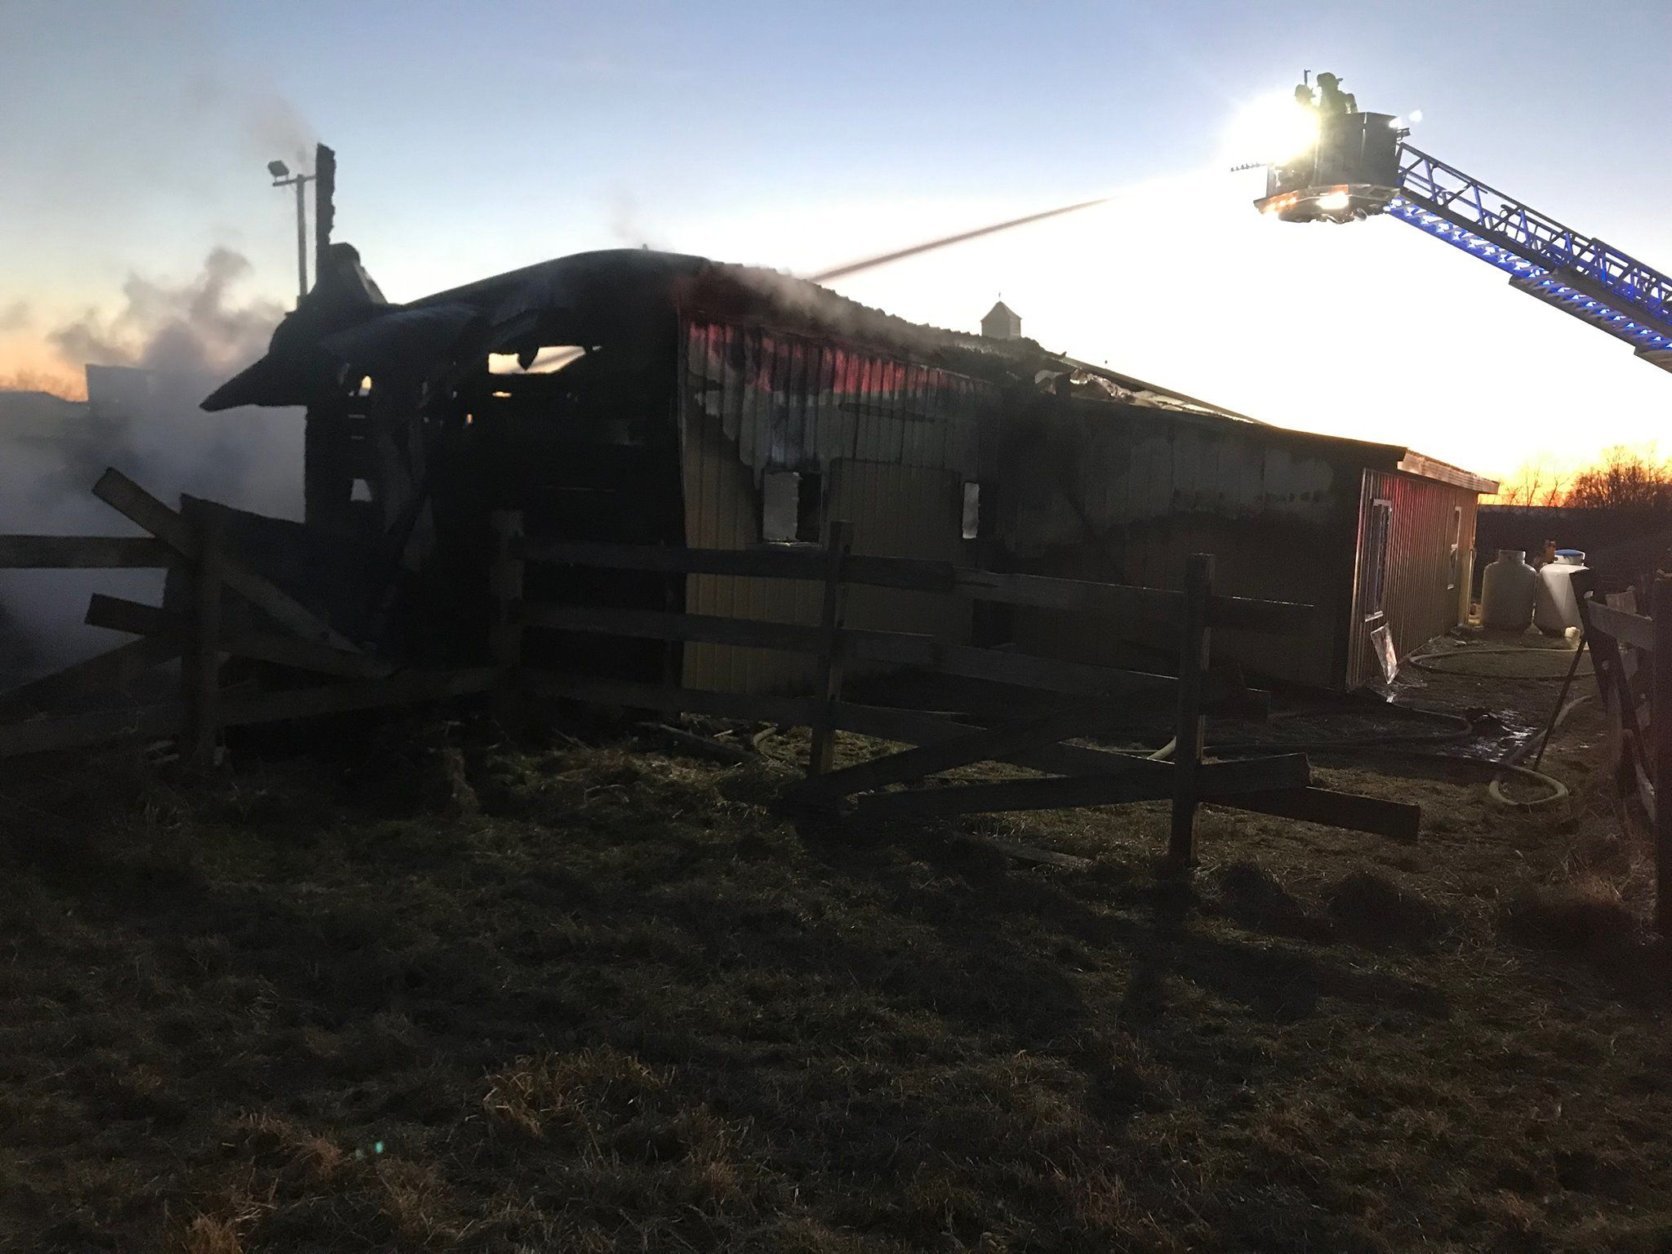 Frederick County, Maryland, firefighters battle a barn fire on Saturday, Feb. 9, 2019. (Courtesy Frederick County Fire and Rescue/Facebook)